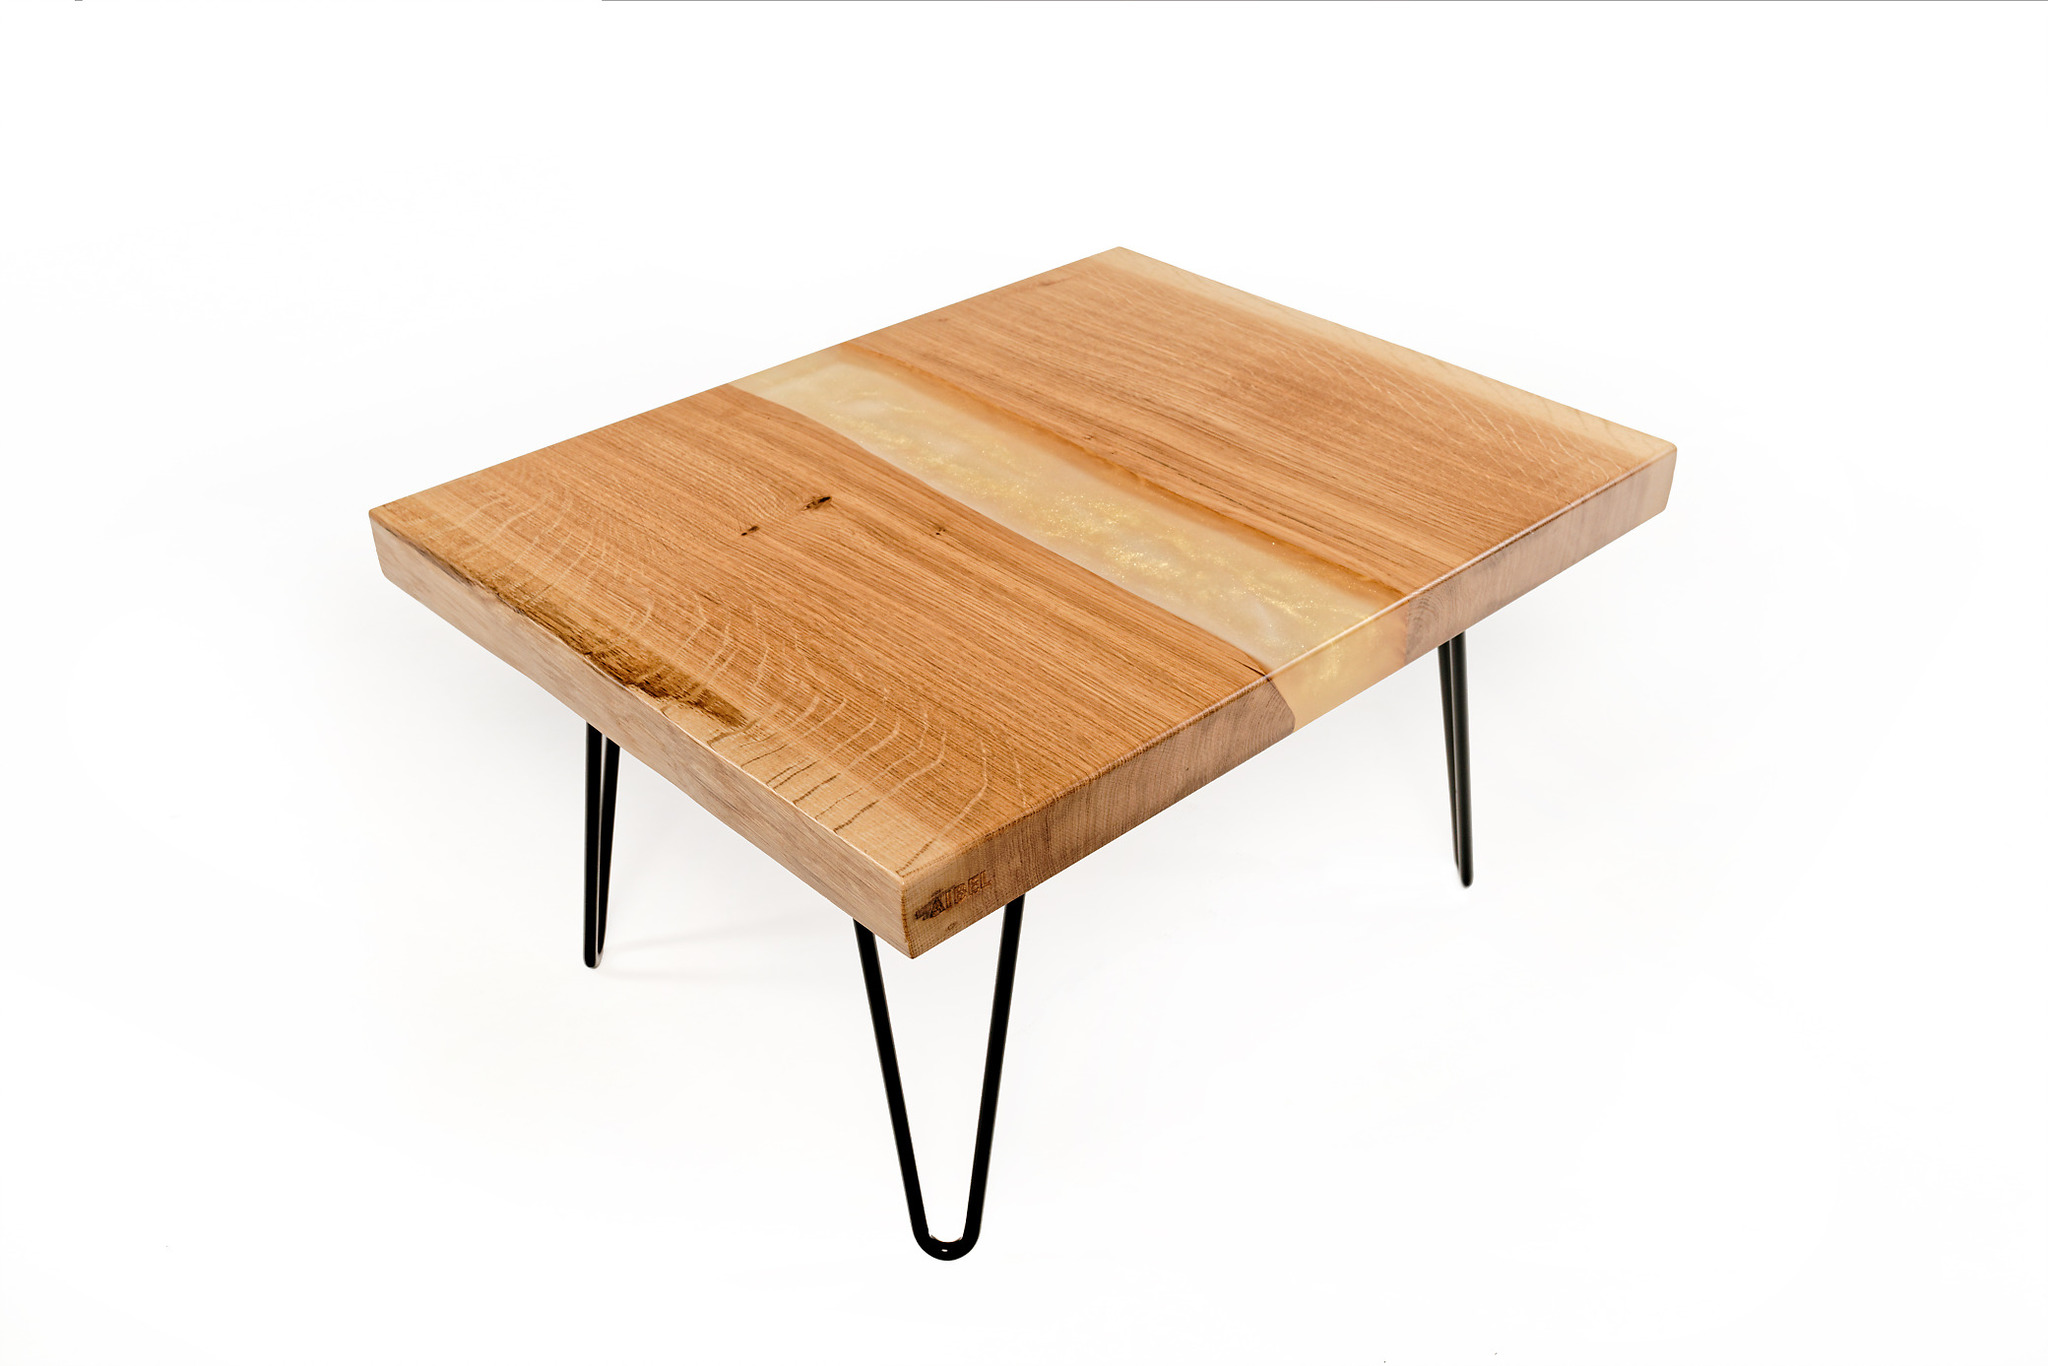 Aibel – oak wood table with gold epoxy resin